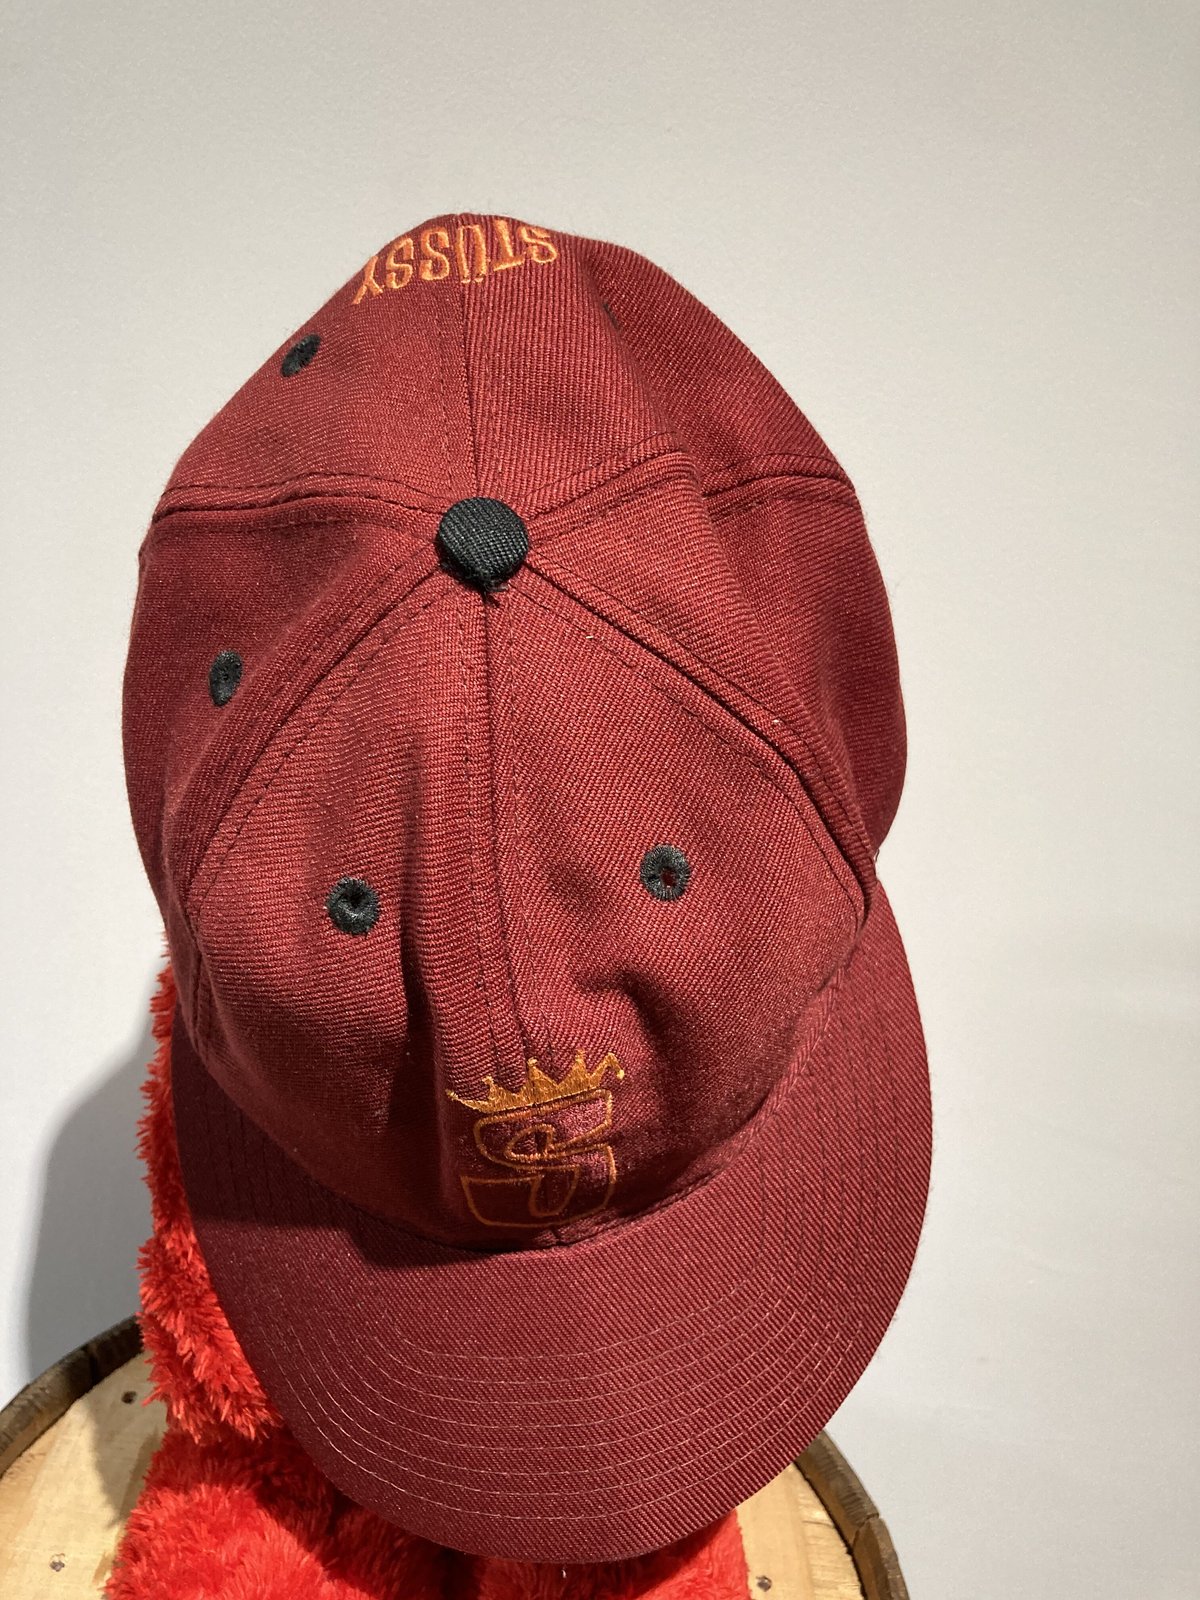 OLD STUSSY CAP made in AMERIKA | WEST MAPS